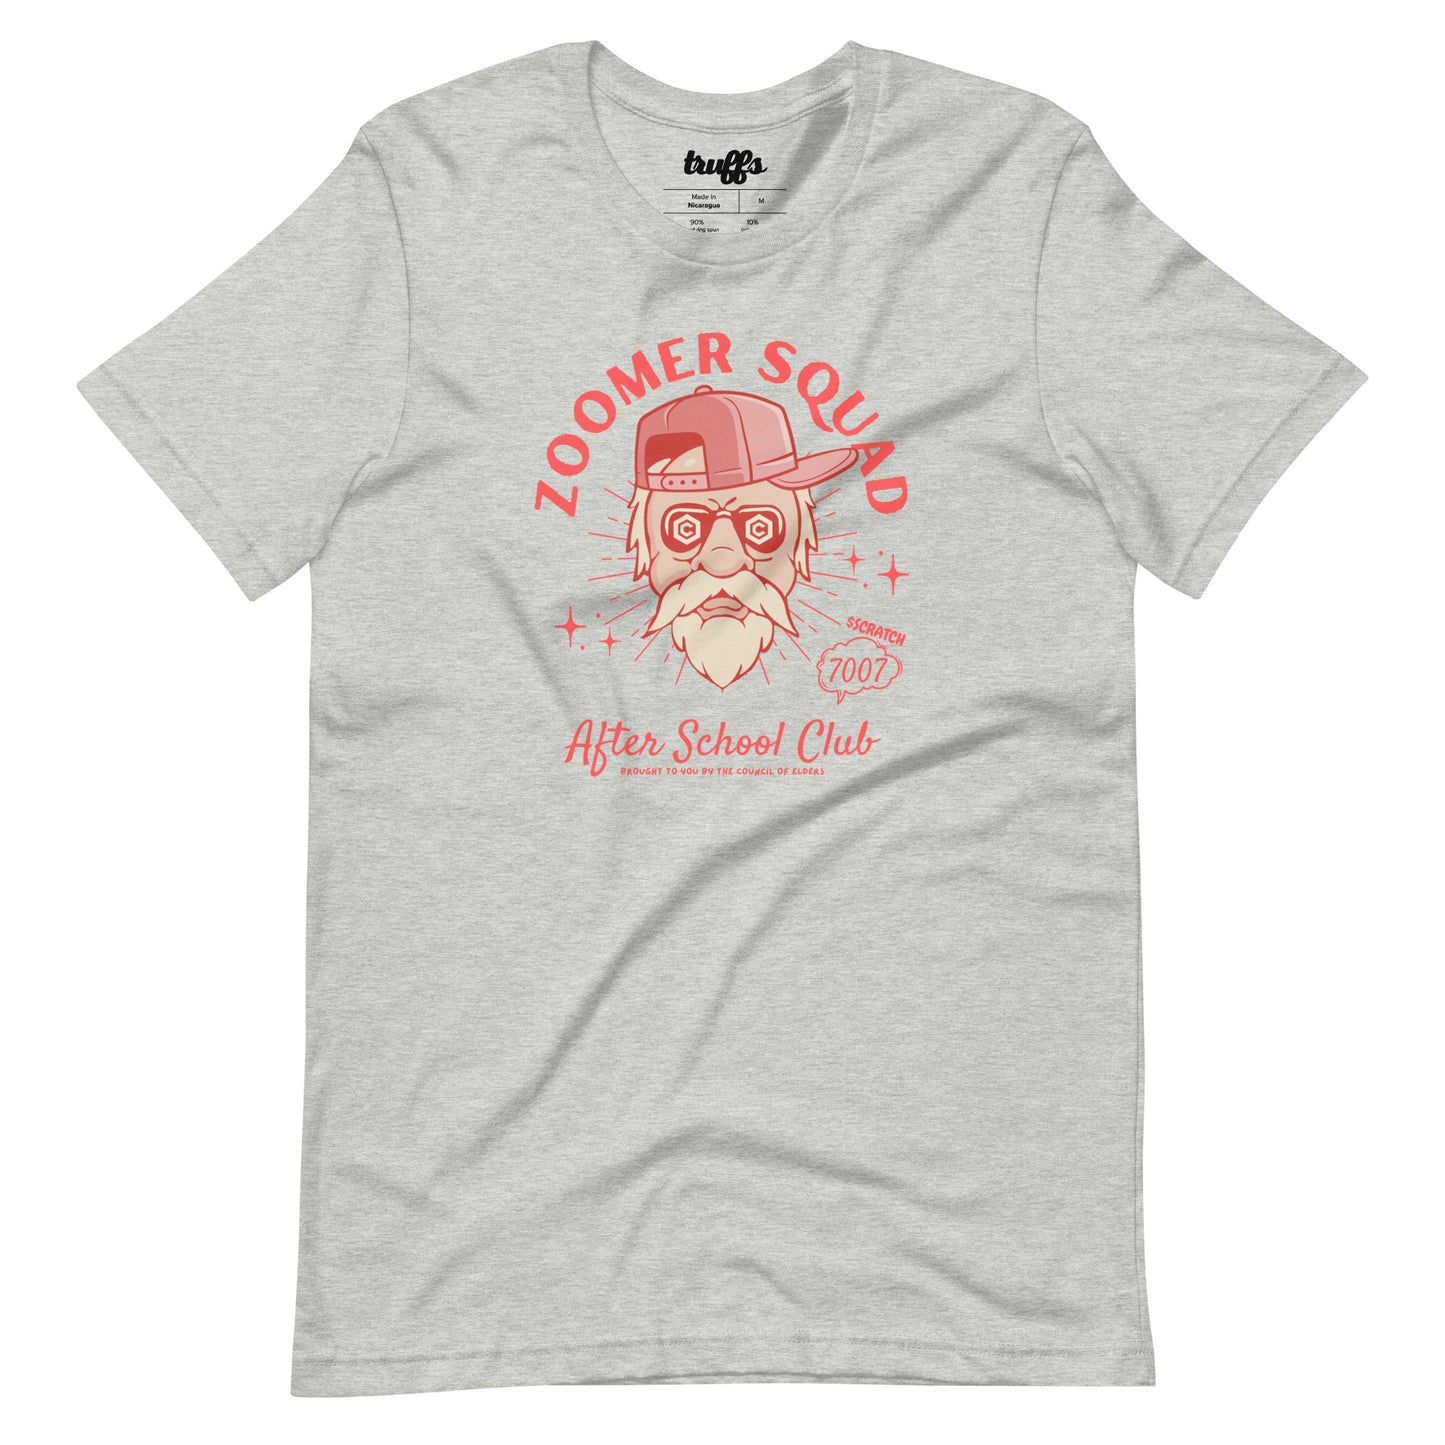 Zoomer Squad - After School Club Unisex T-shirt (Athletic Heather)